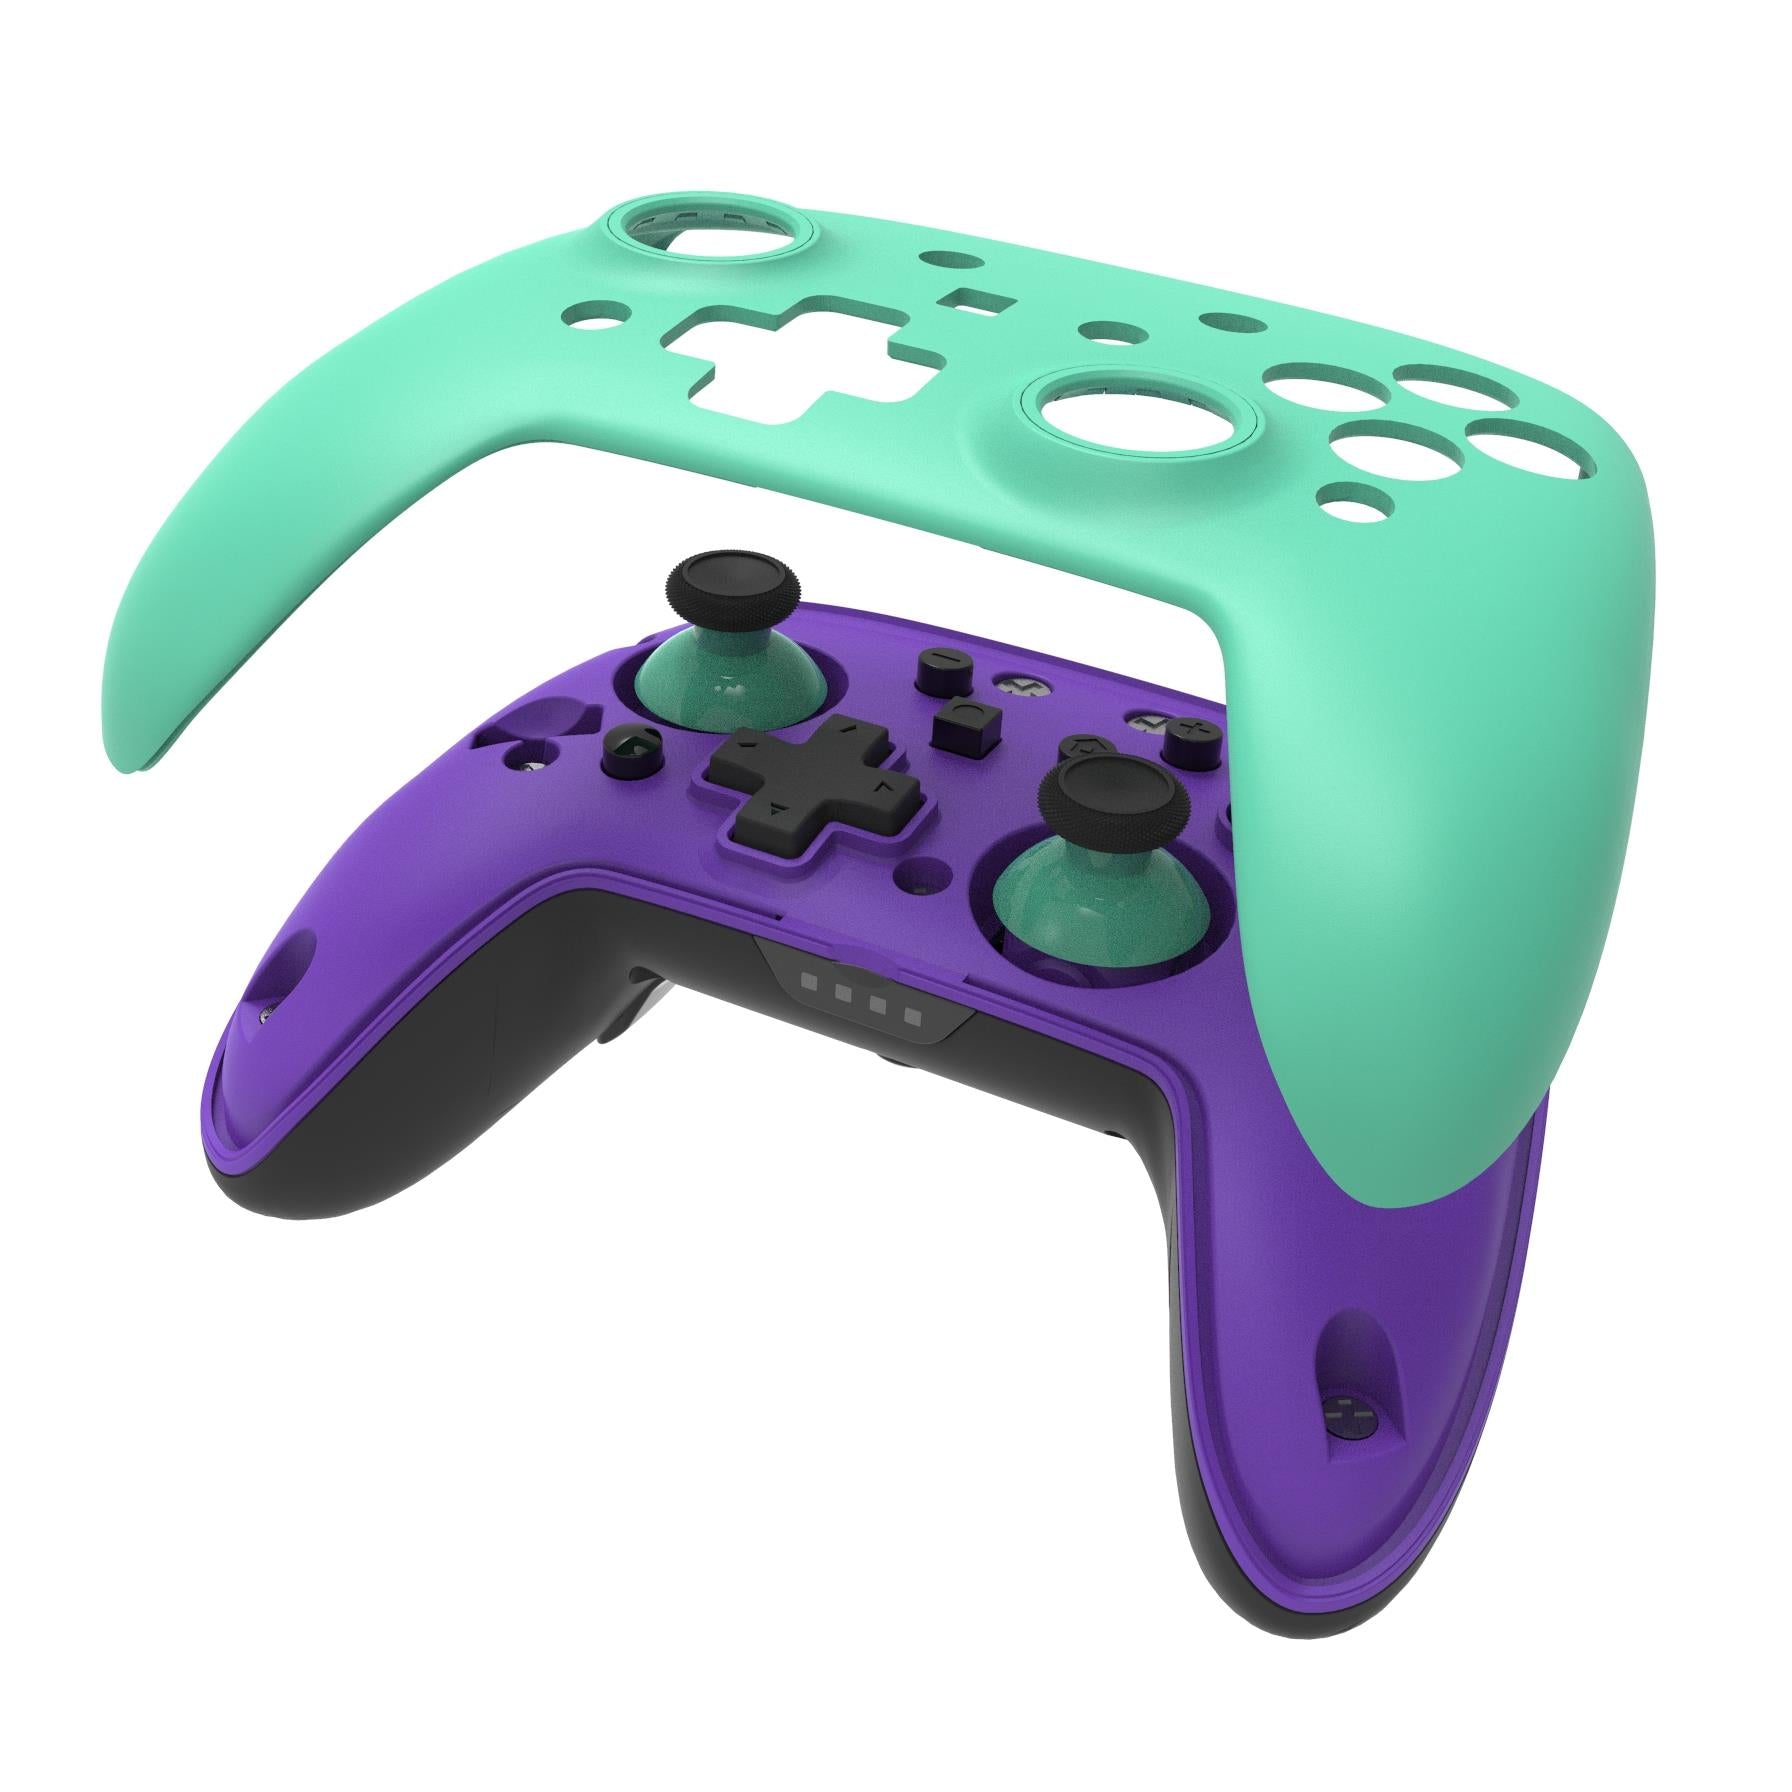 3rd earth wireless controller for switch with interchangeable face plate (purple and teal)